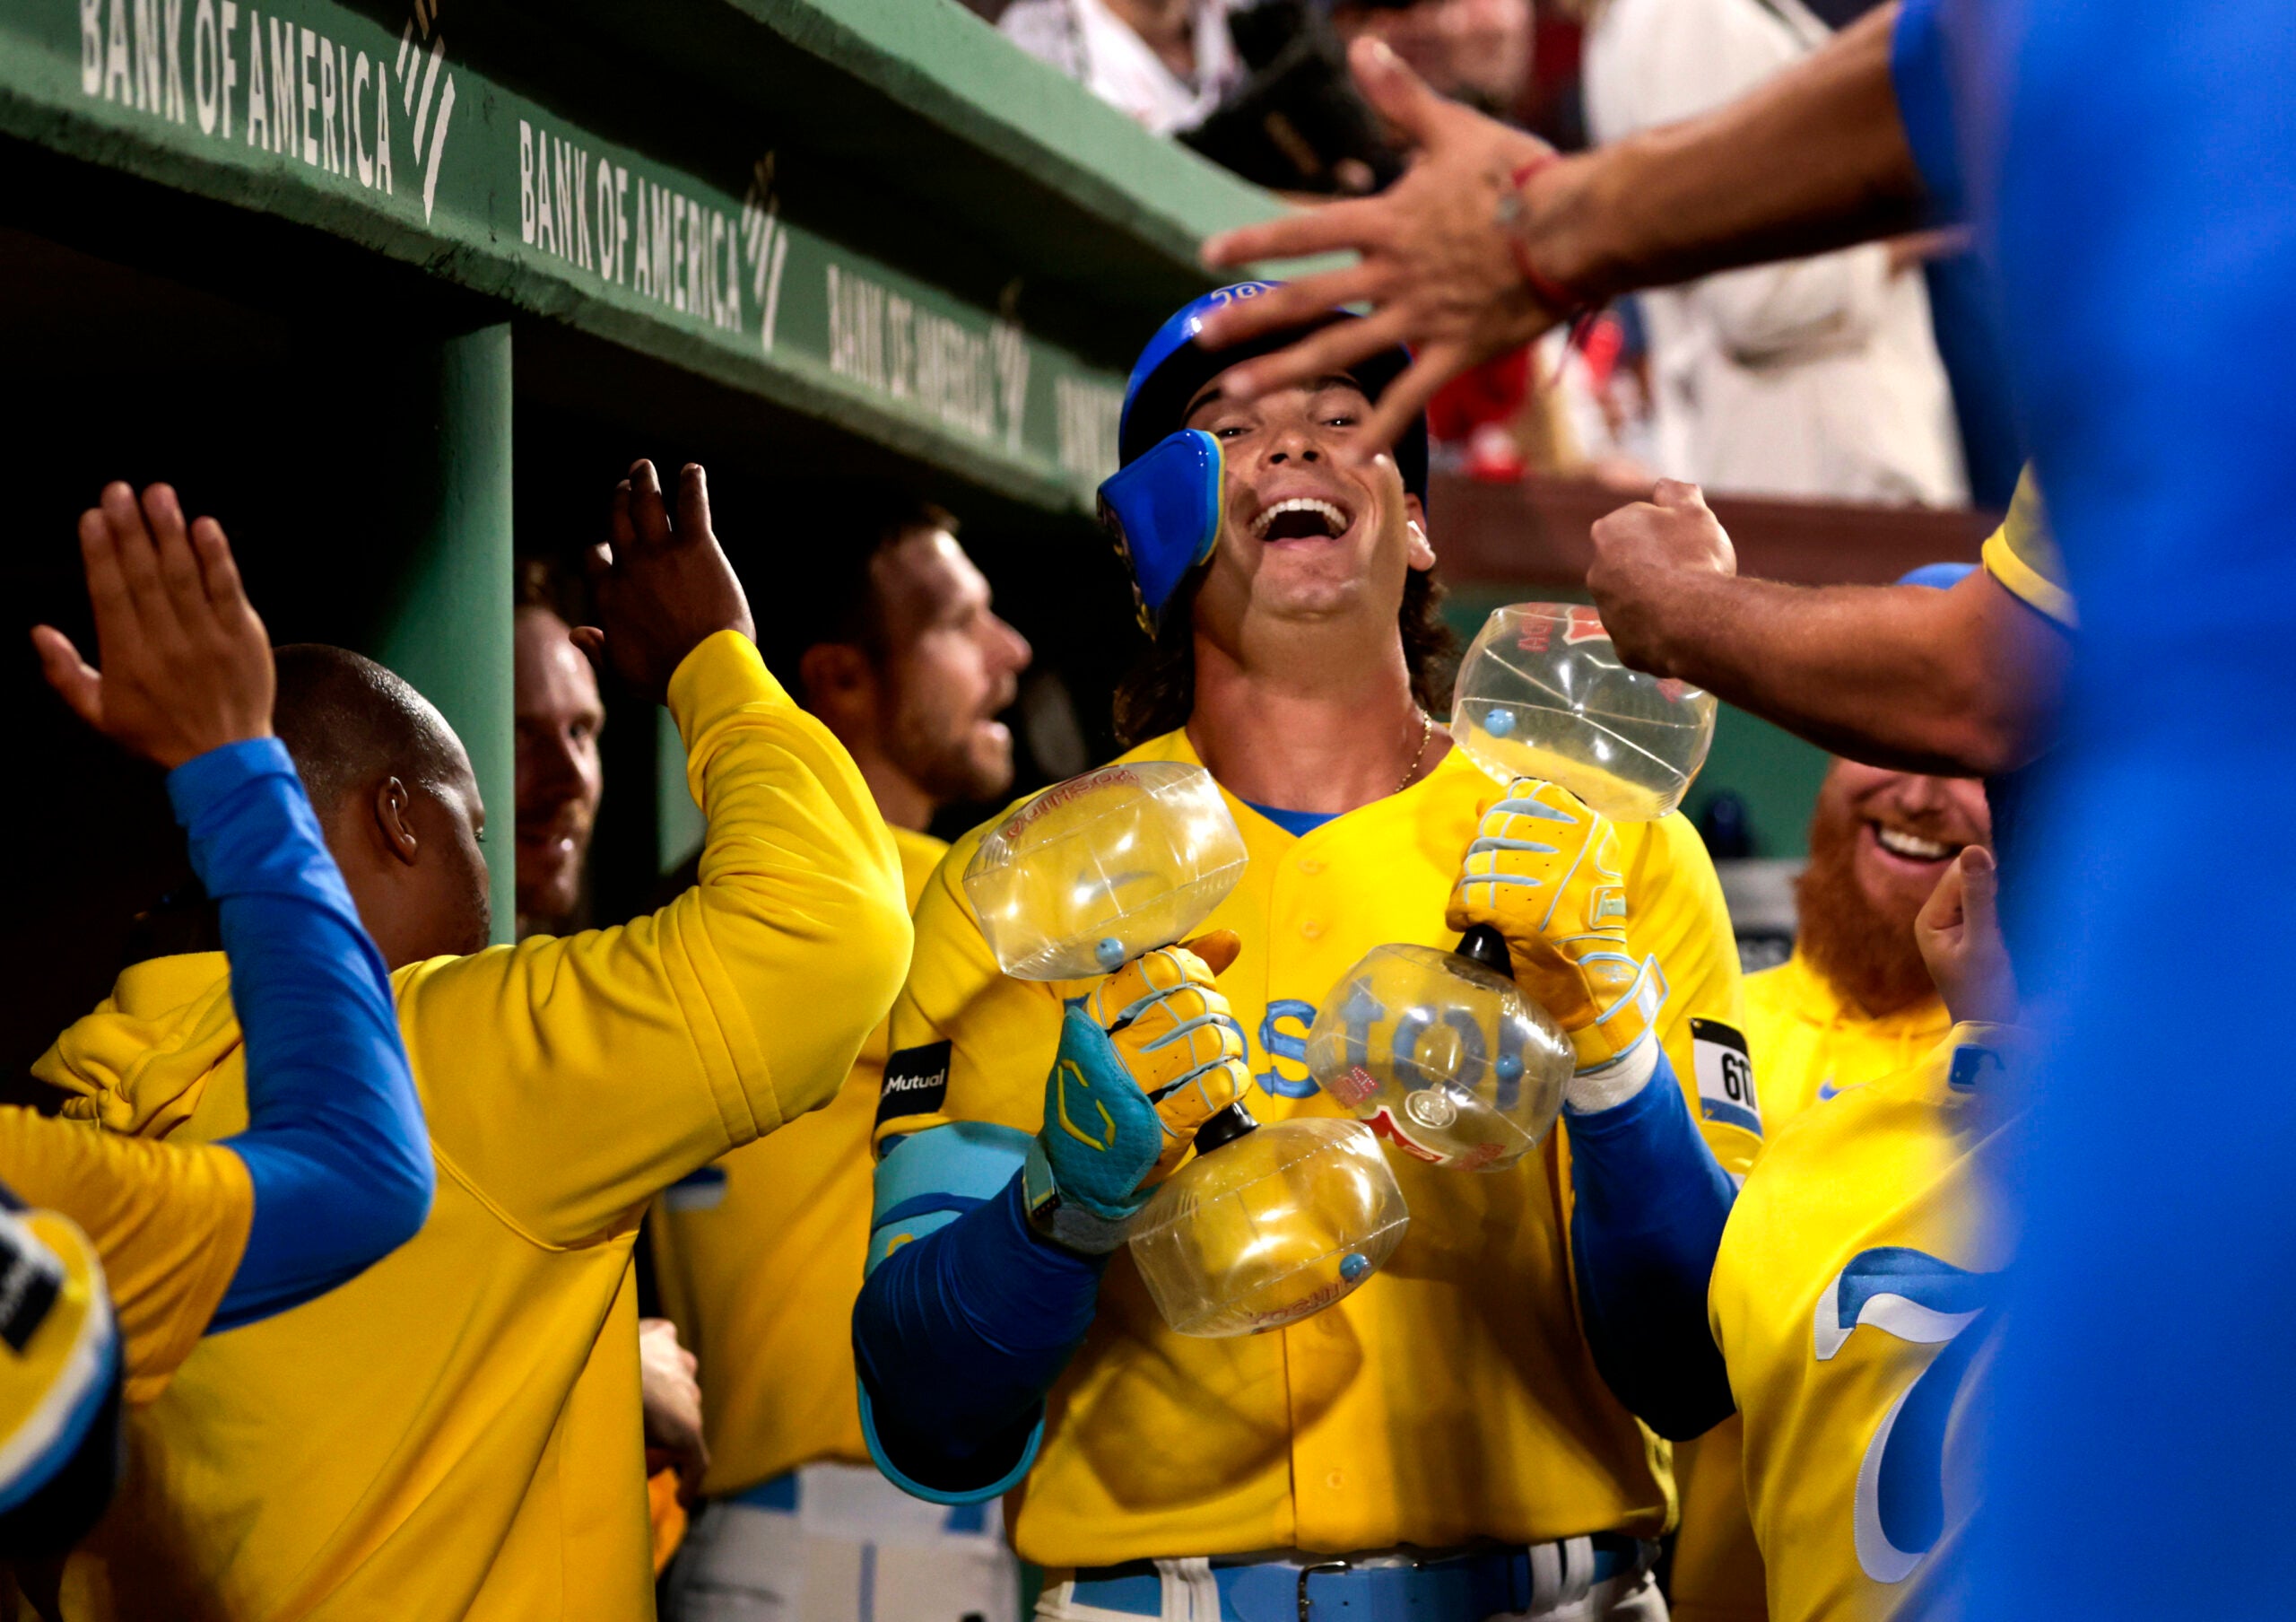 In yellow jerseys, players celebrate as one laughs toward the sky.